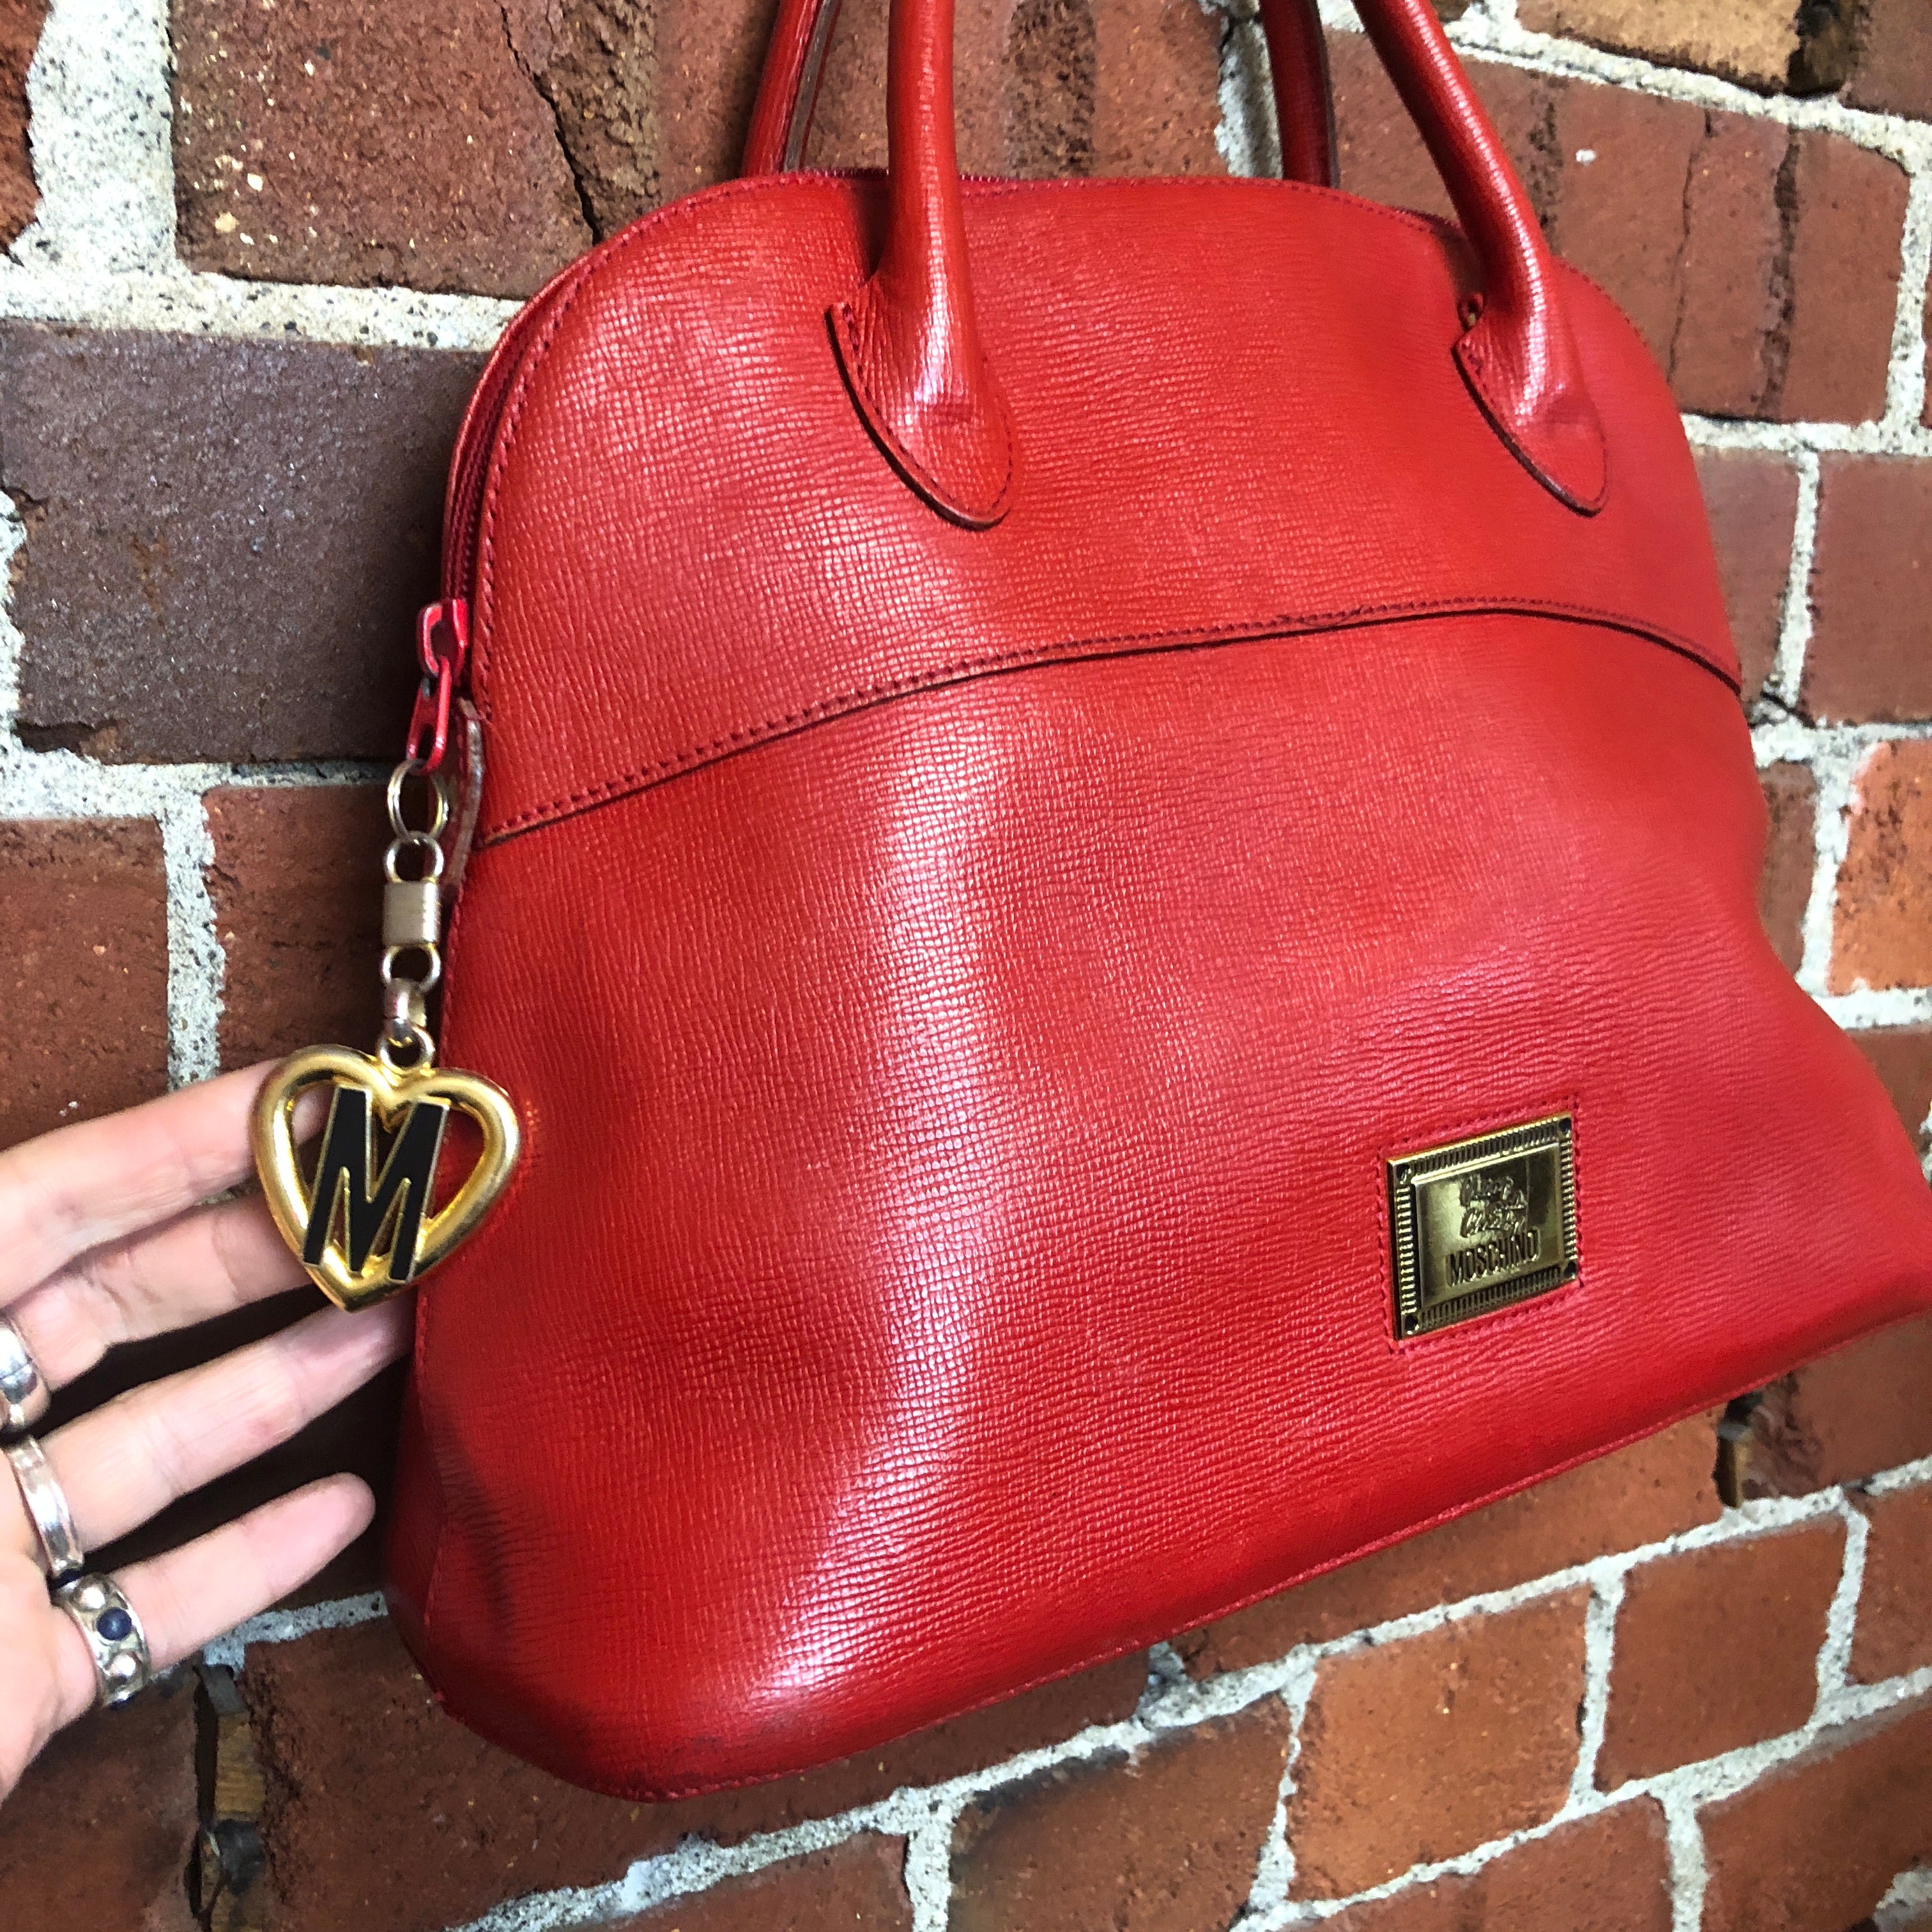 Moschino by Redwall 1990s leather handbag